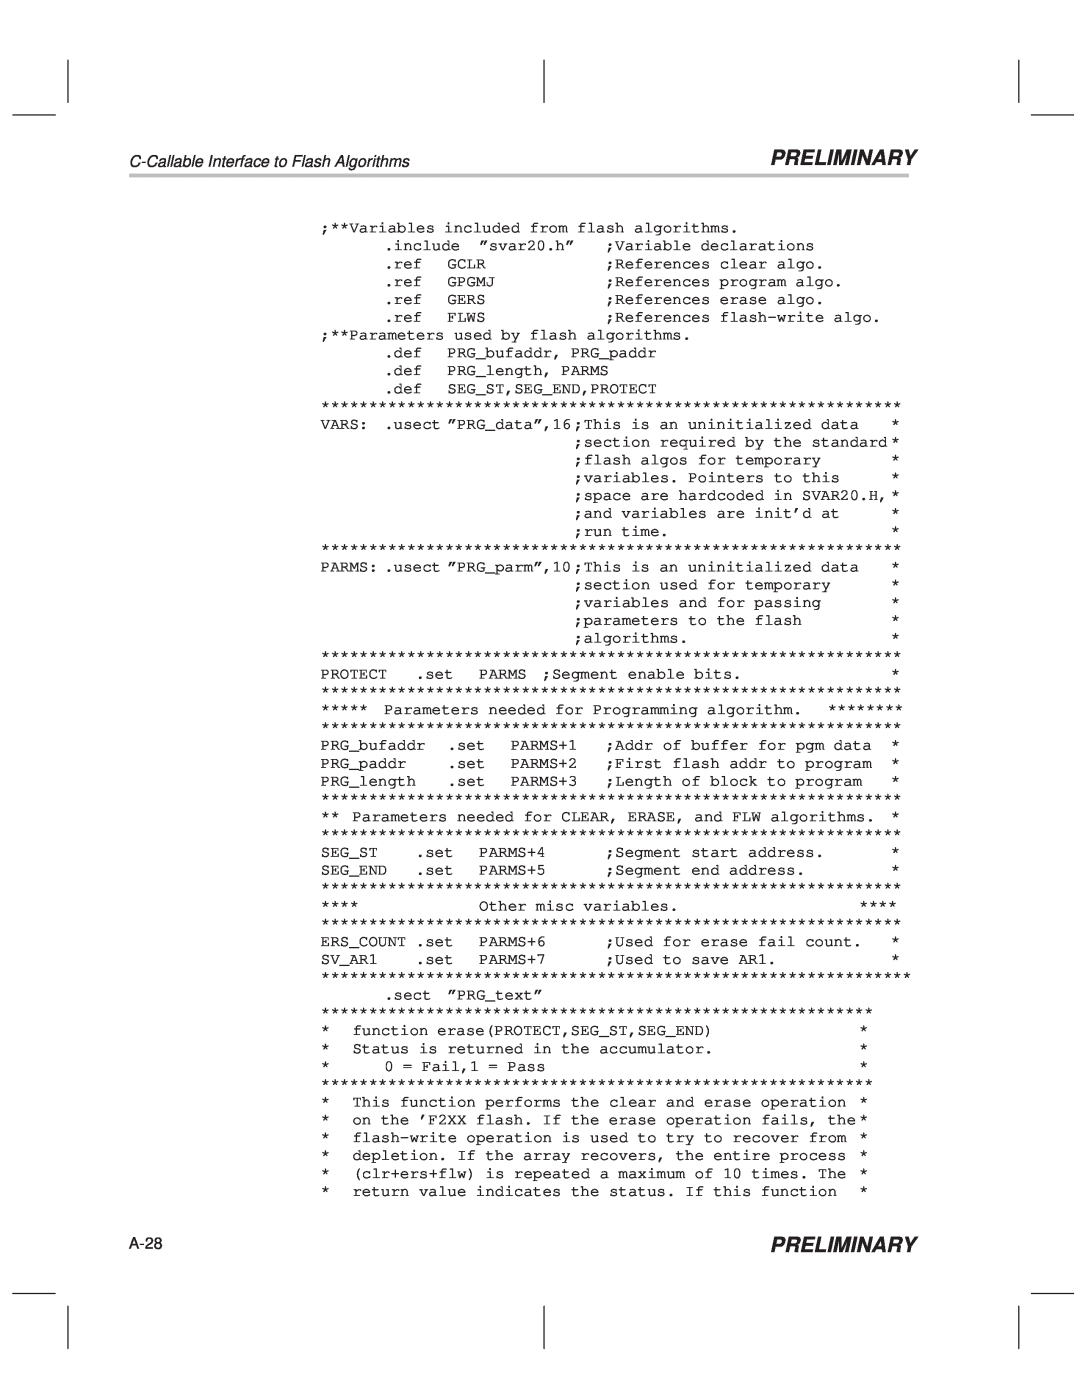 Texas Instruments TMS320F20x/F24x DSP manual Preliminary, C-Callable Interface to Flash Algorithms, A-28 